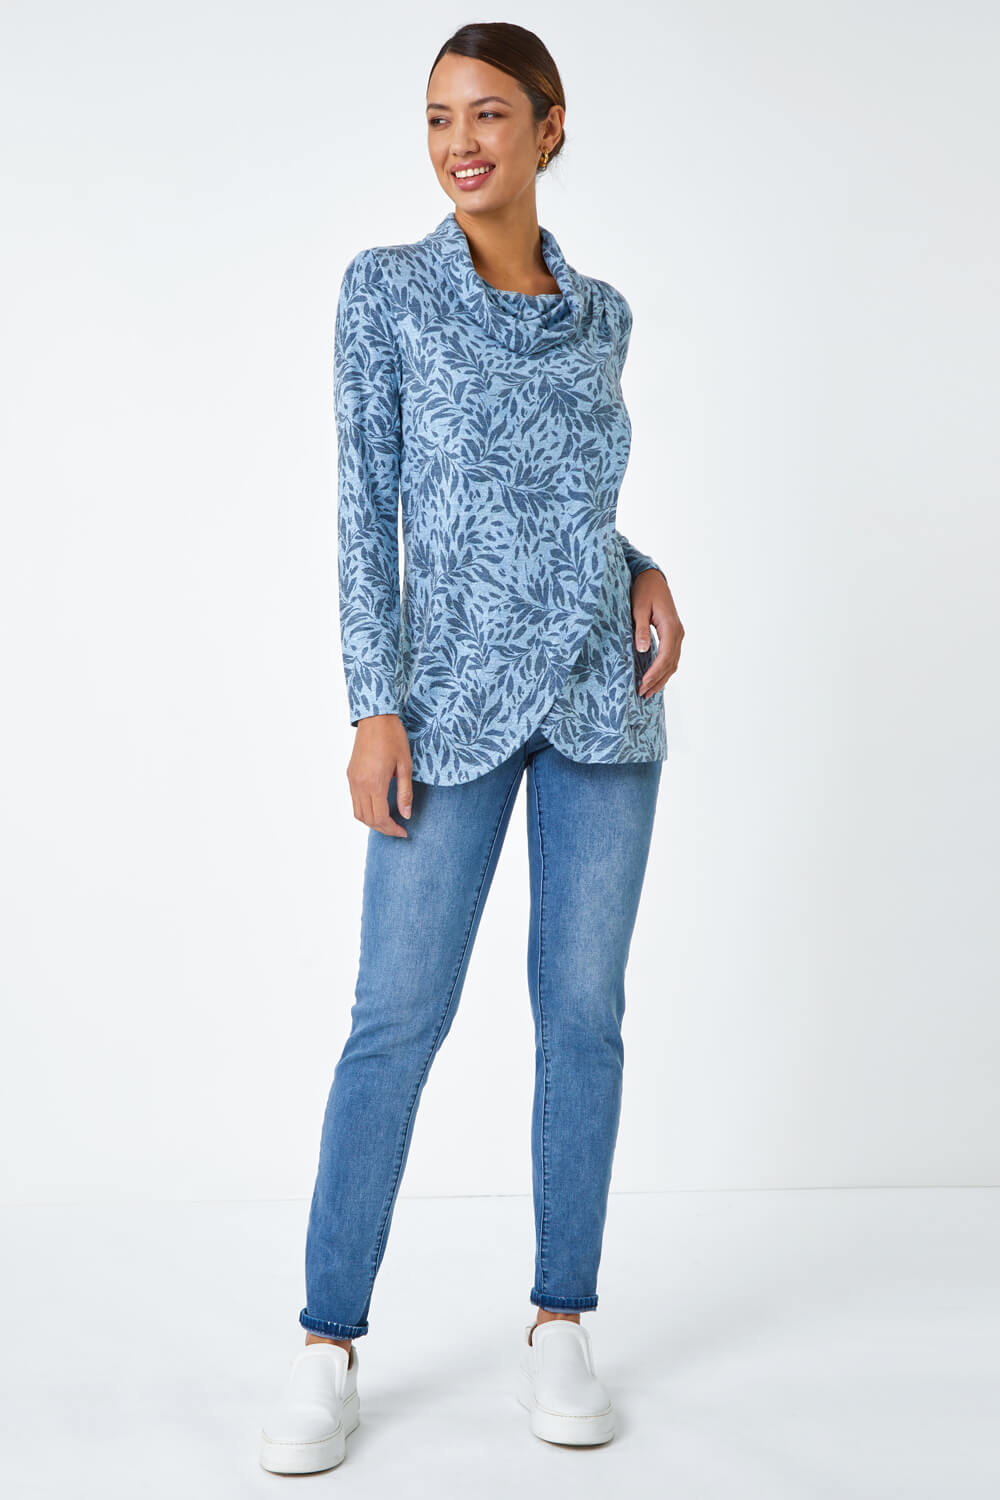 Blue Floral Print Cowl Neck Stretch Top , Image 2 of 5